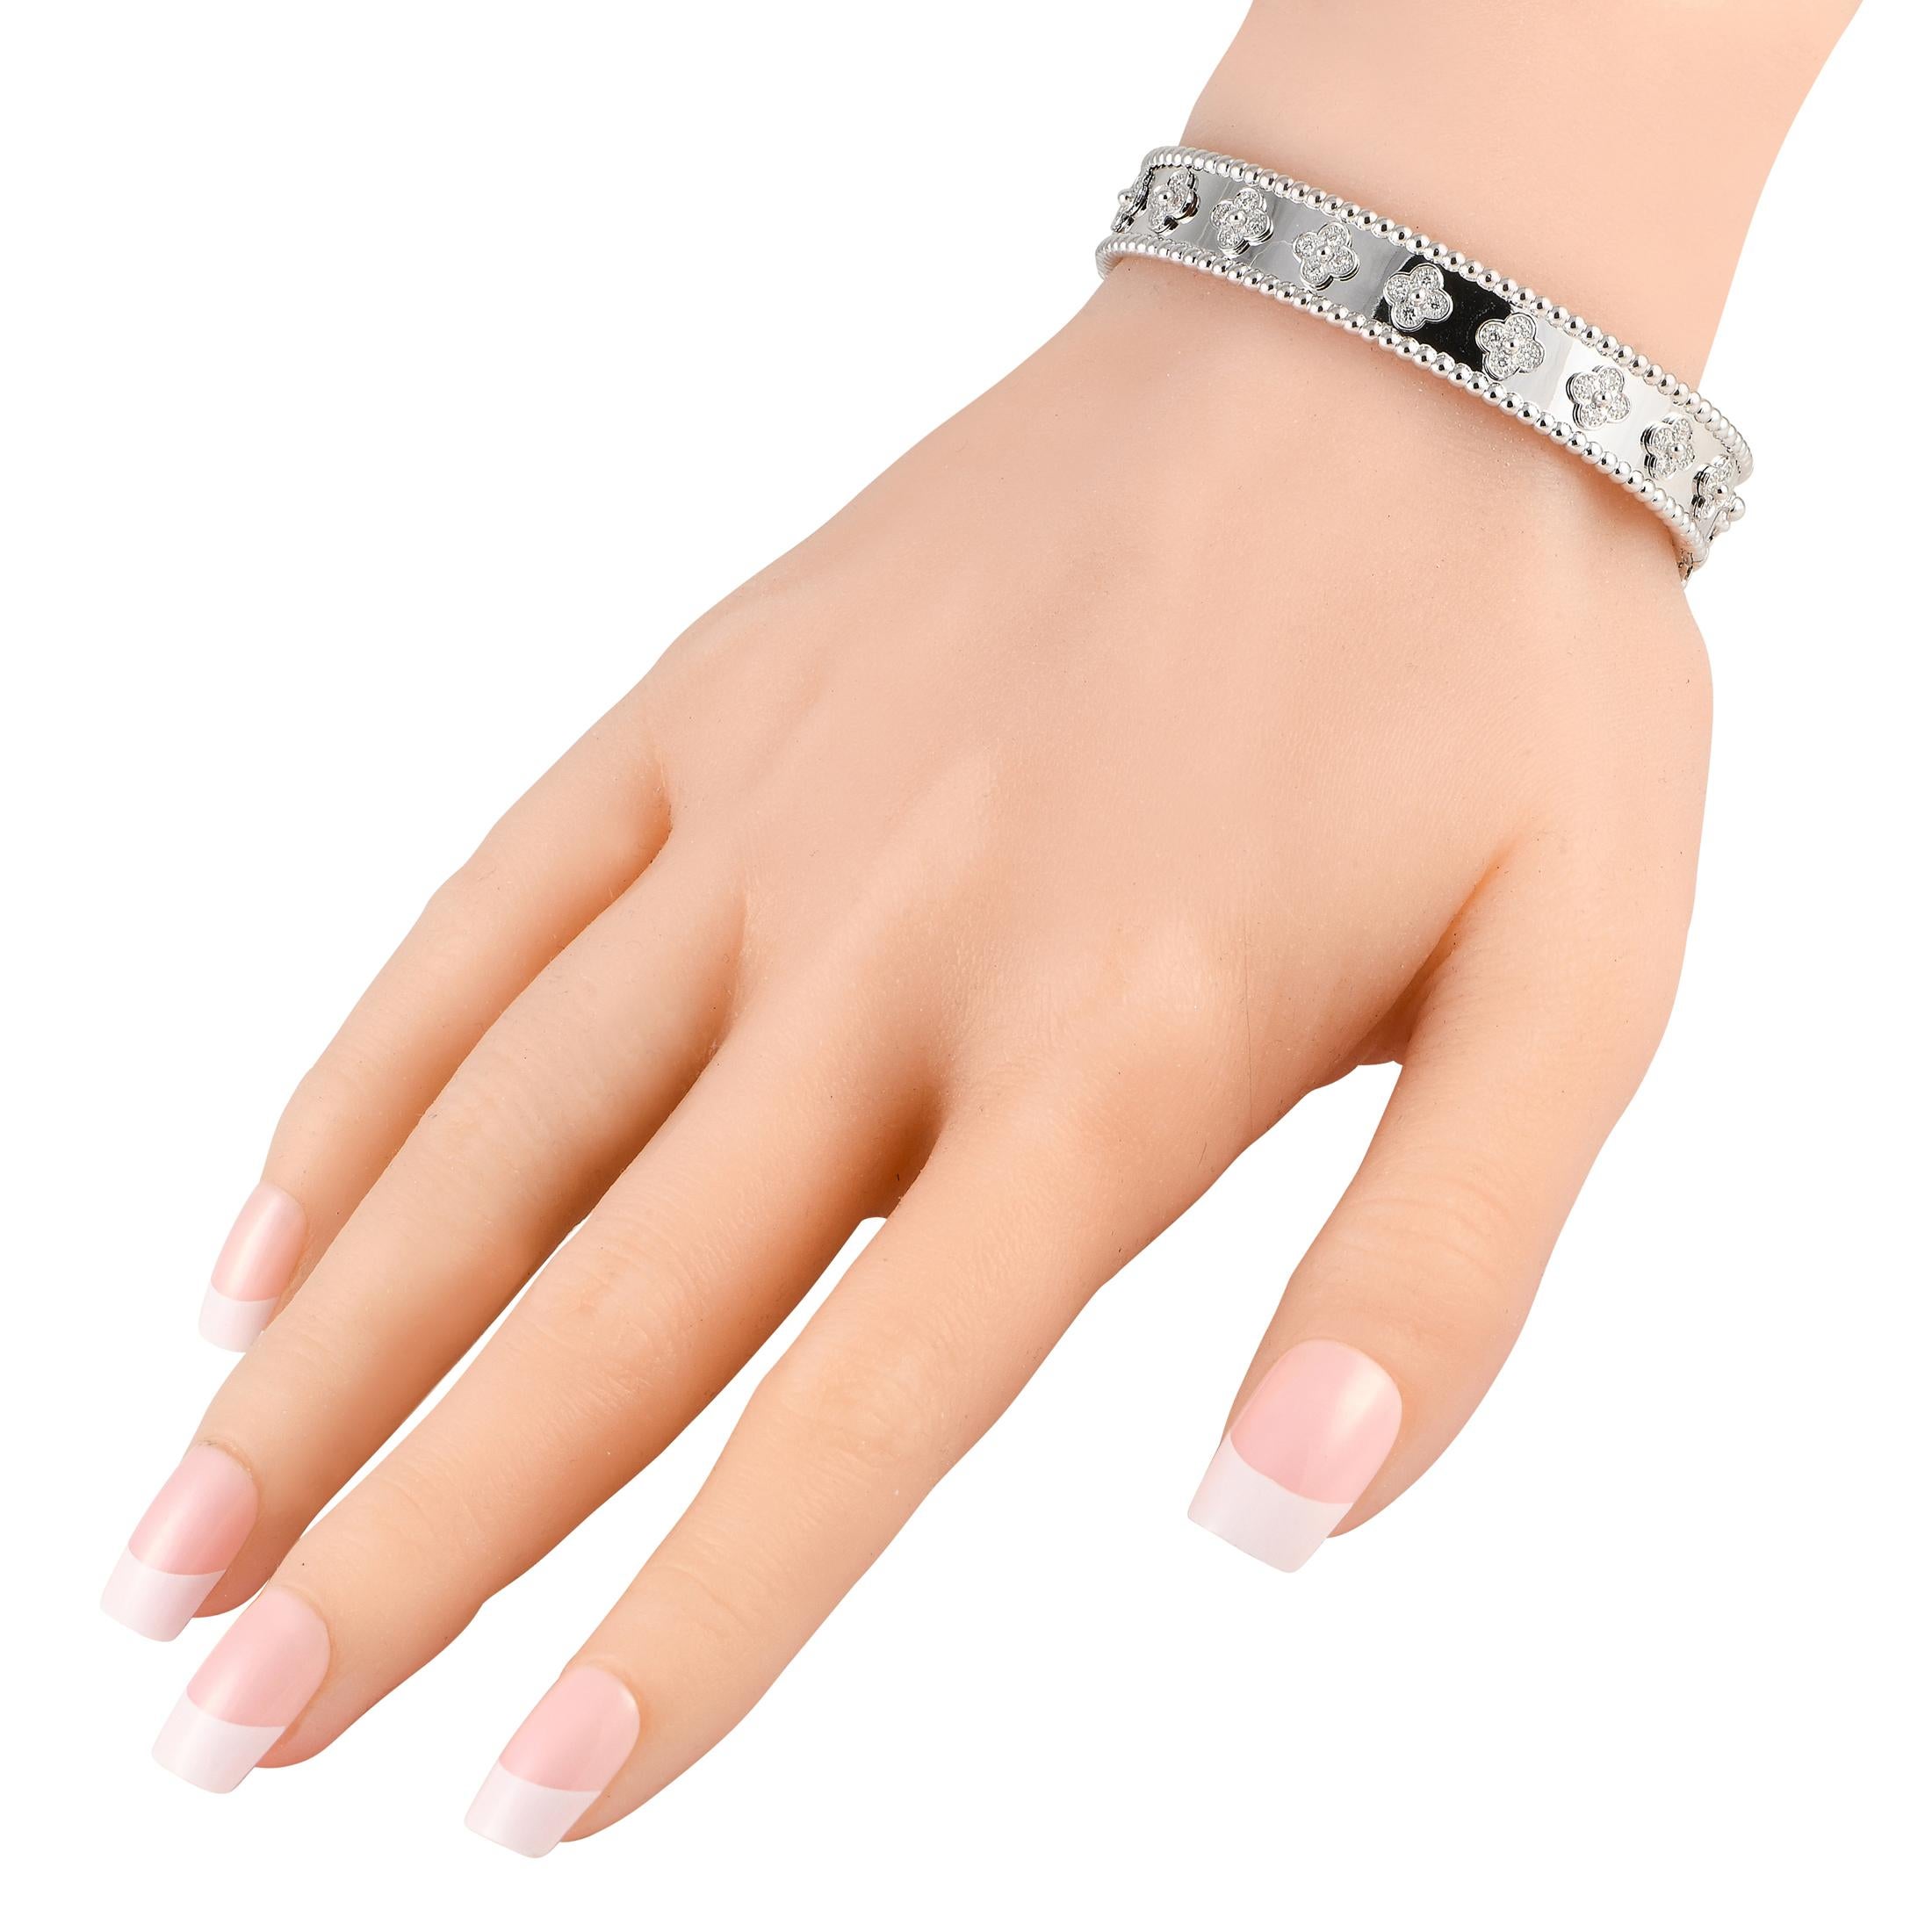 Luck will be on your side with this bracelet on your wrist. This Van Cleef & Arpels Perle Clovers bracelet in 18K white gold is adorned with diamond-dotted clover motifs. Each clover-shaped motif has its four sectors dotted with a round diamond. At